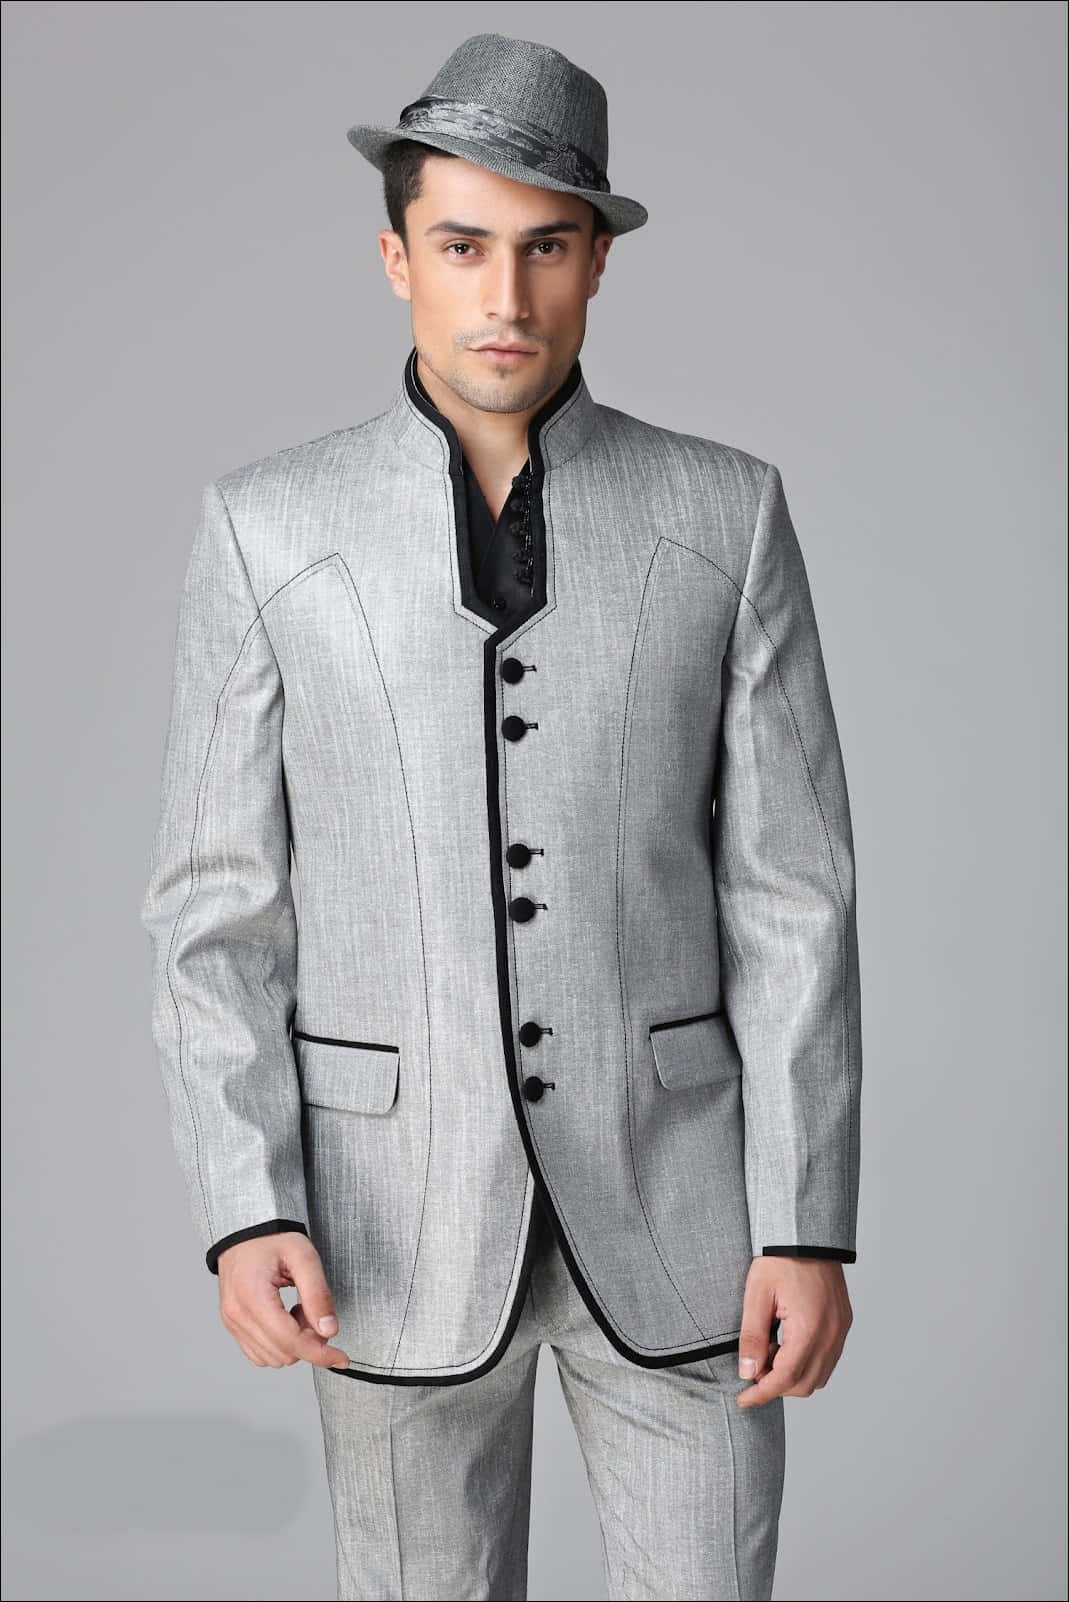 Enhance your confidence with the perfect suit